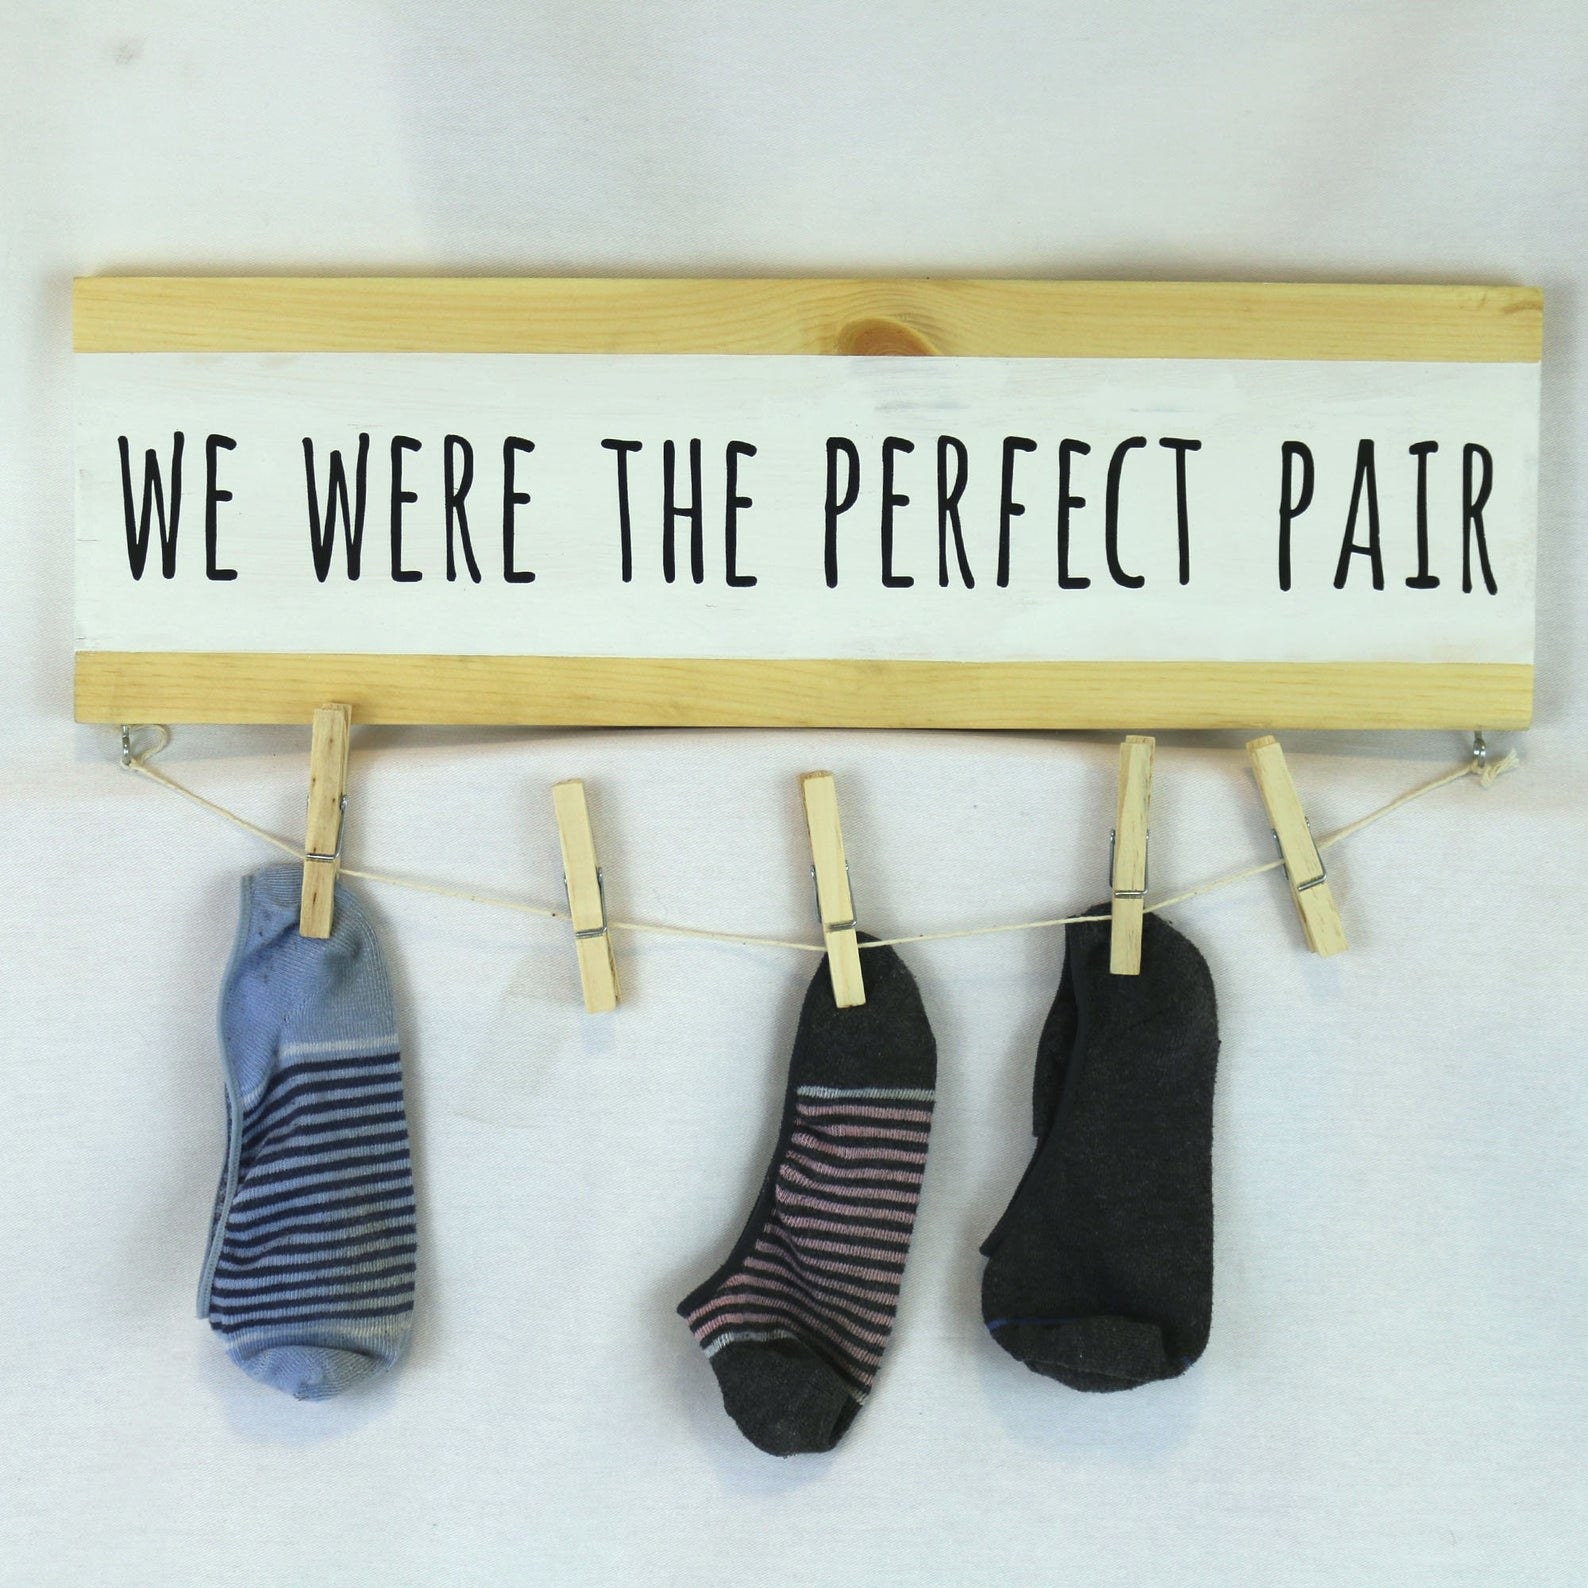 the sign that says we were the perfect pair with socks hanging from it